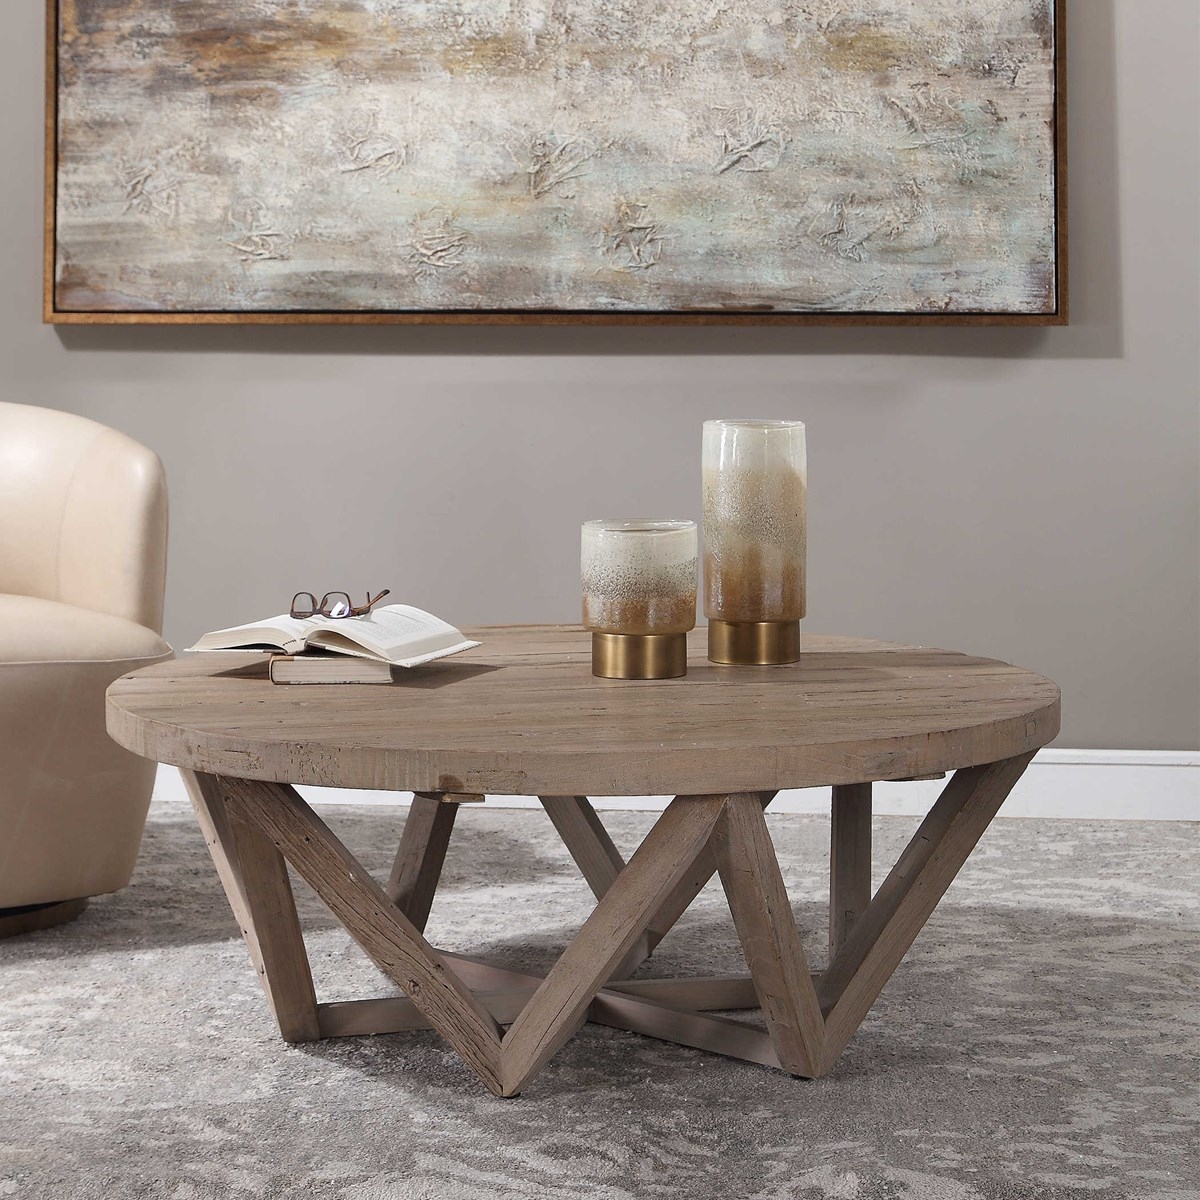 KENDRY COFFEE TABLE - Image 2